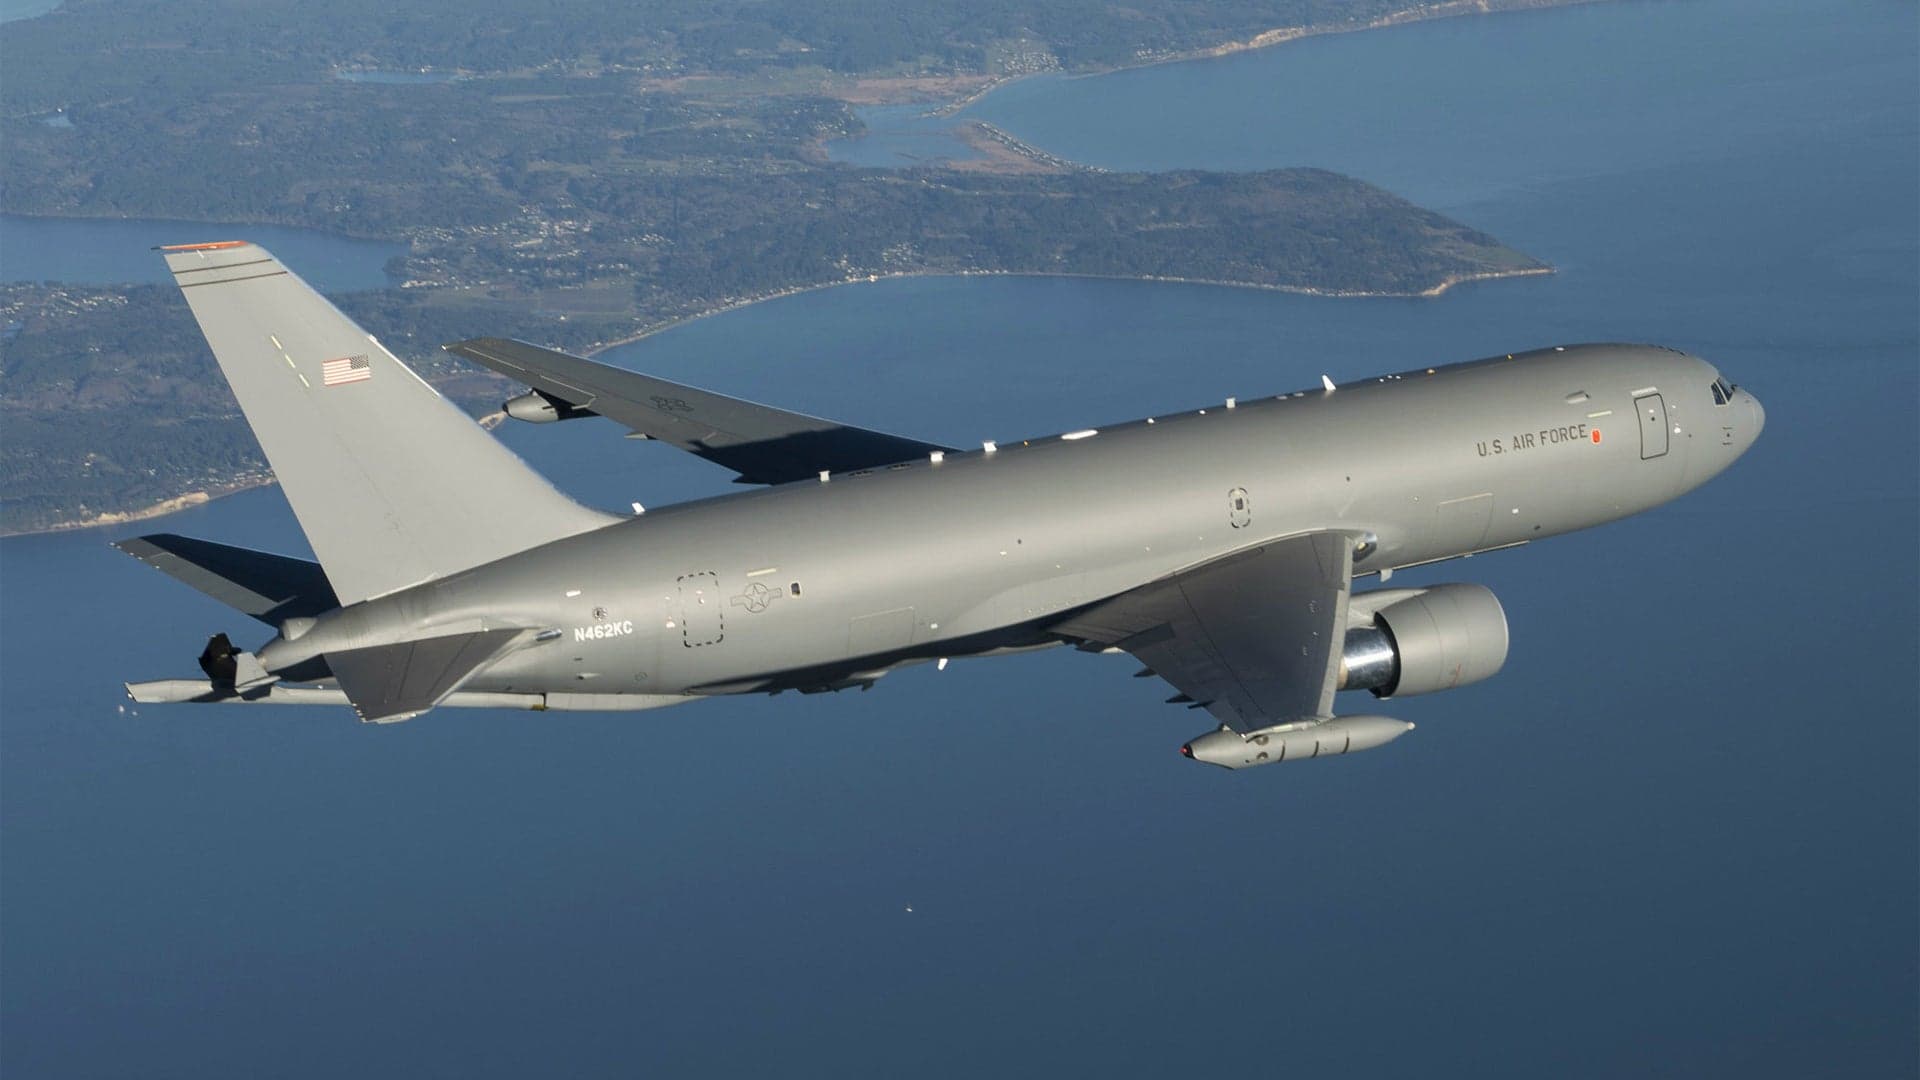 Listen To KC-46 Tankers On A Test Flight Offer To Refuel F-15s During Stolen Q400 Incident